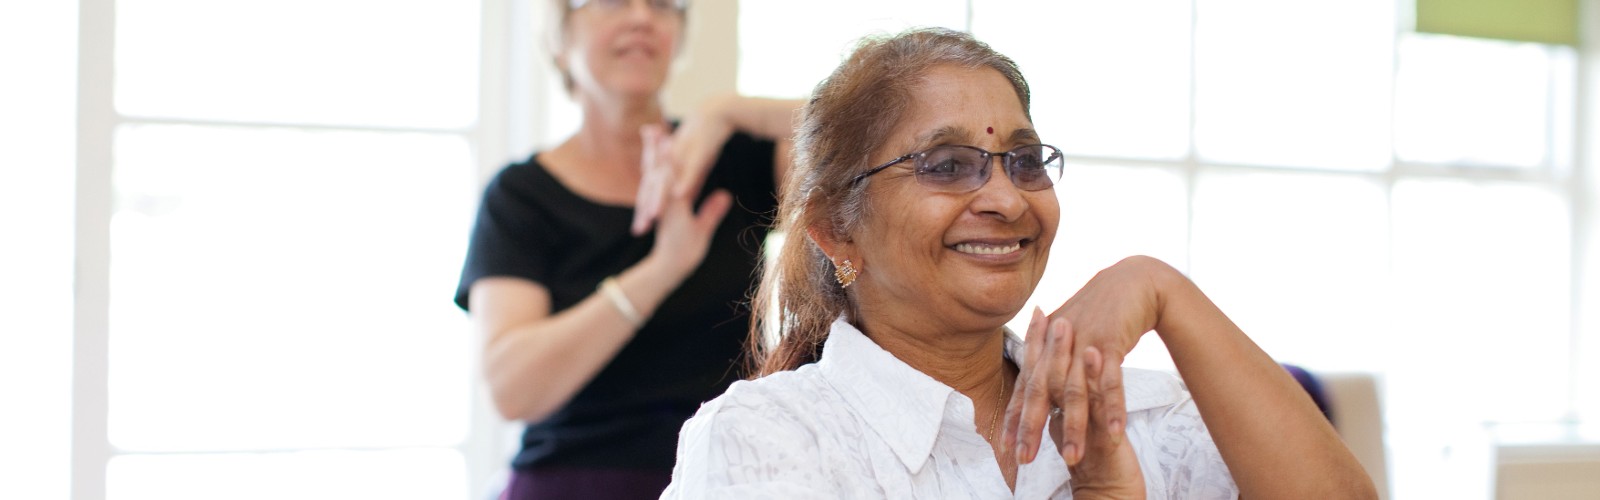 An older Asian lady smiling as she takes part in an ϲʿֱexercise class